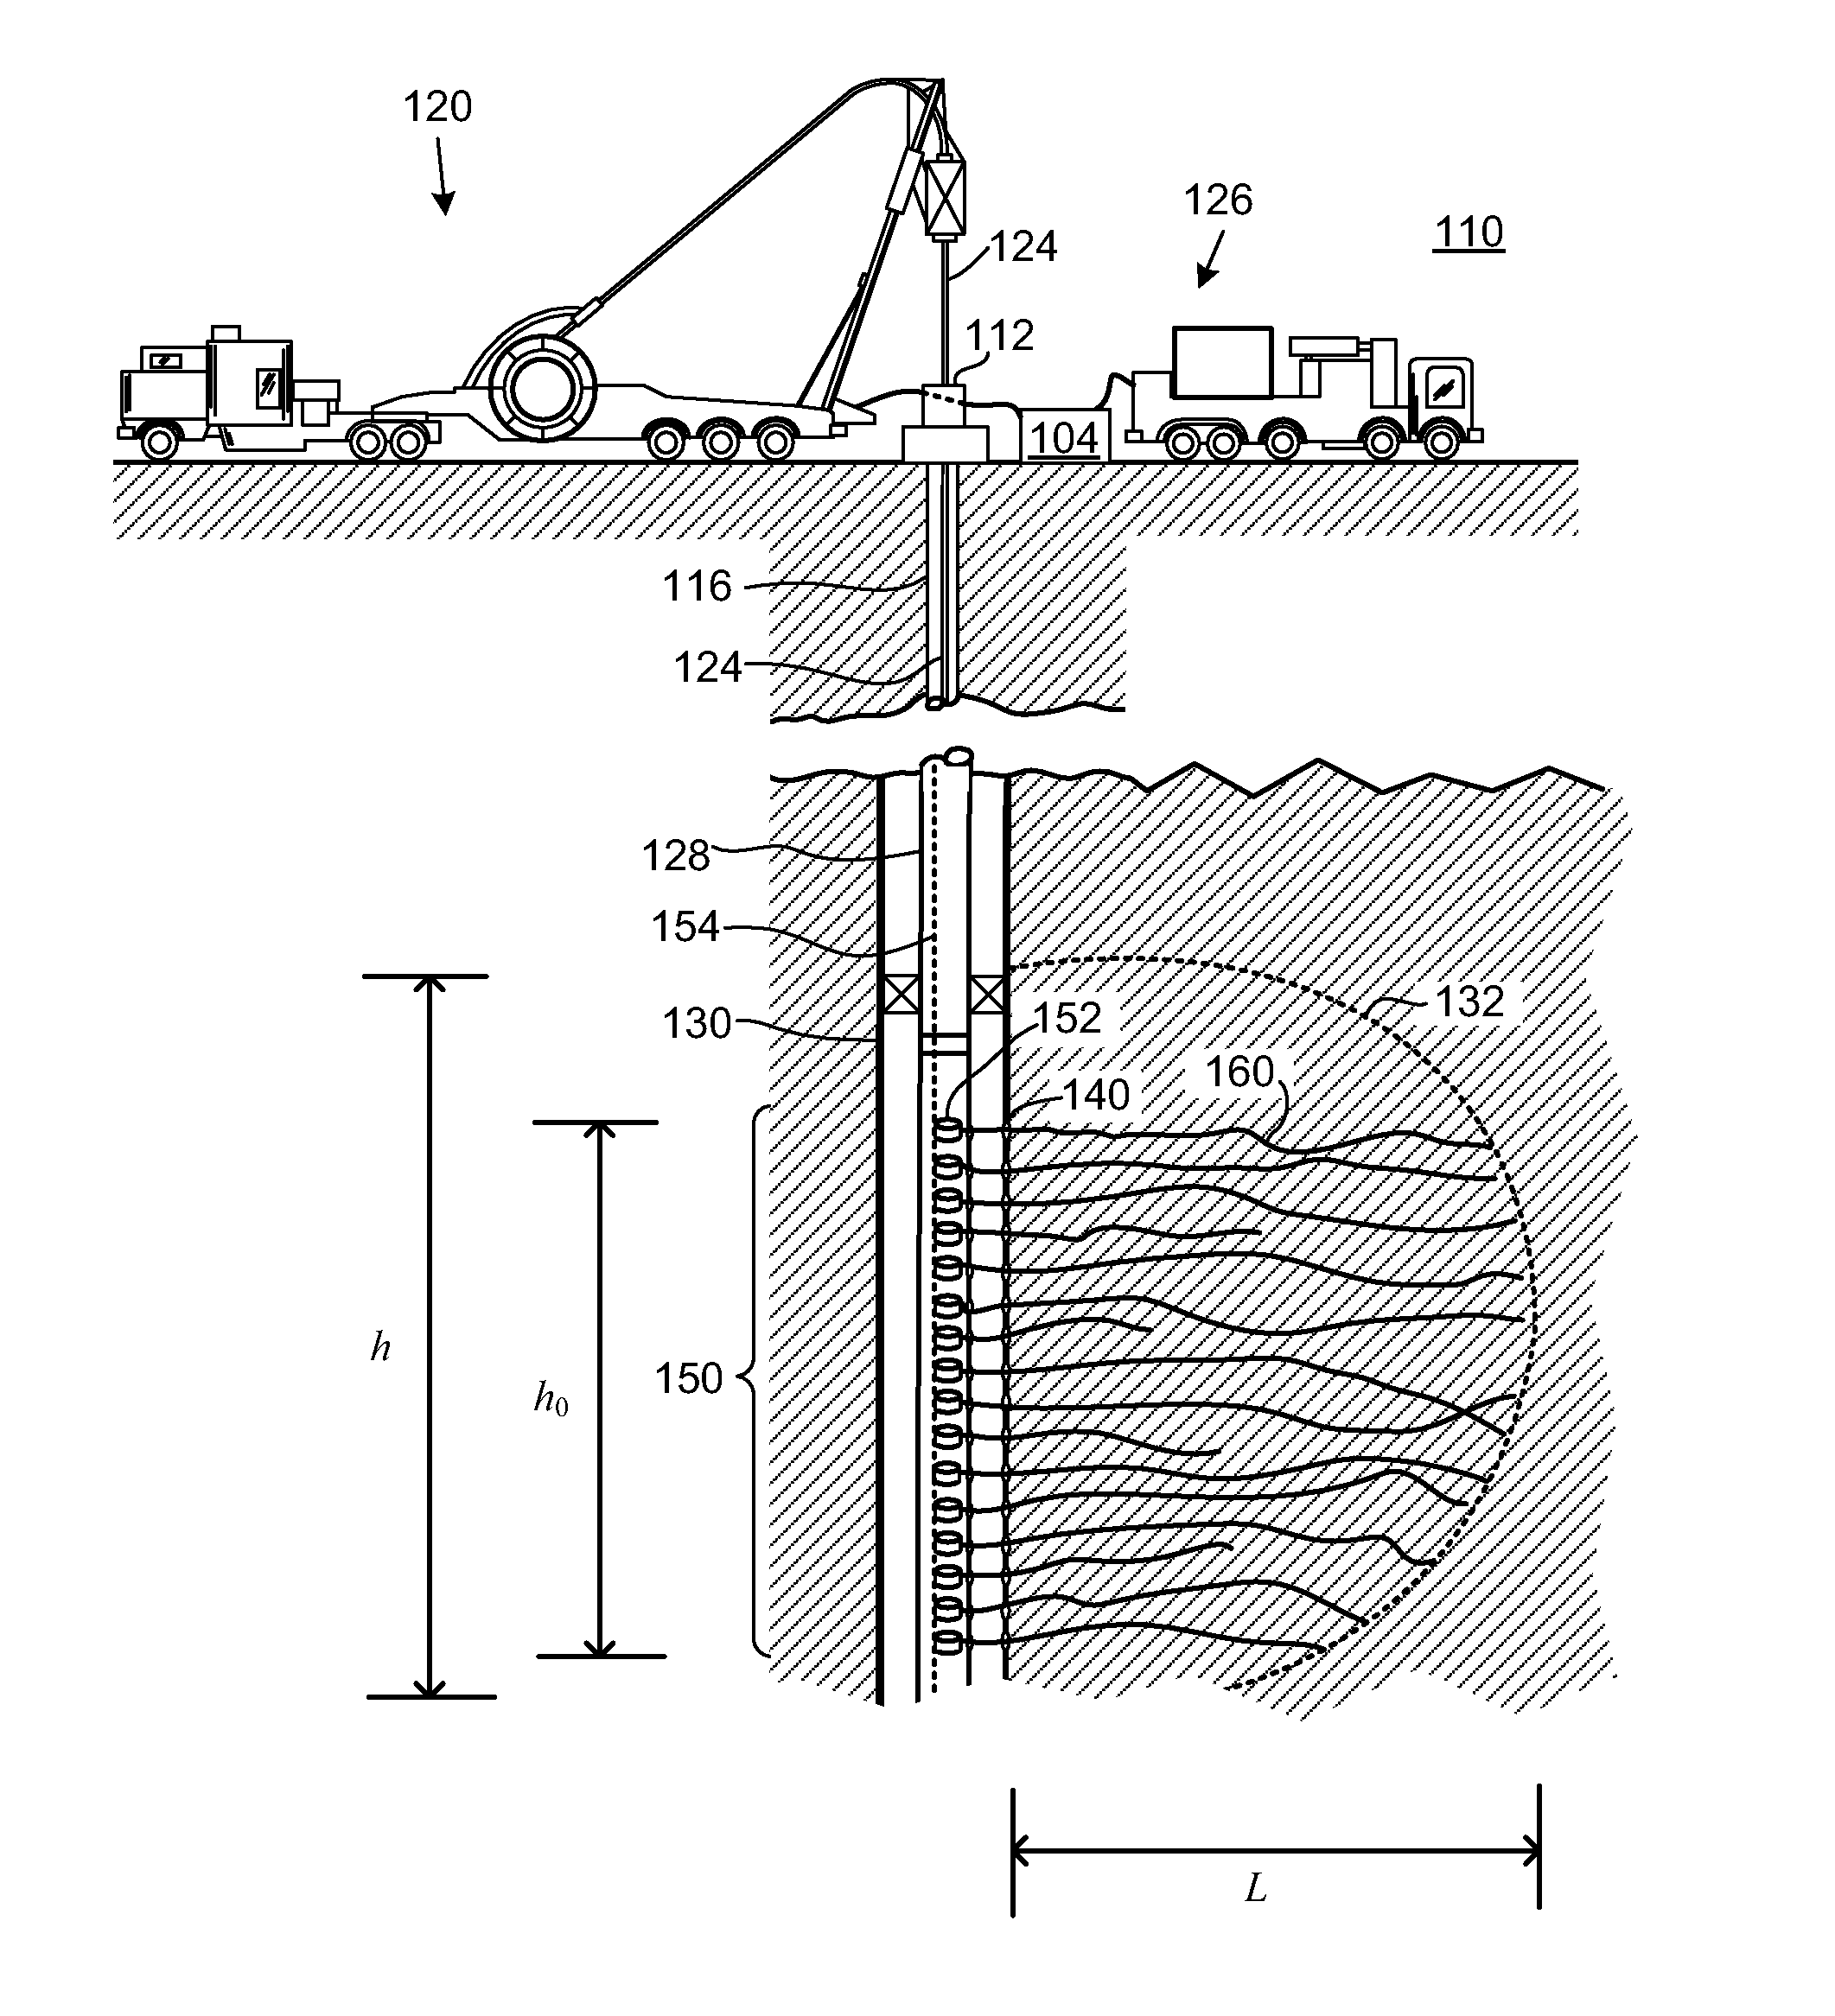 Continuous fibers for use in hydraulic fracturing applications